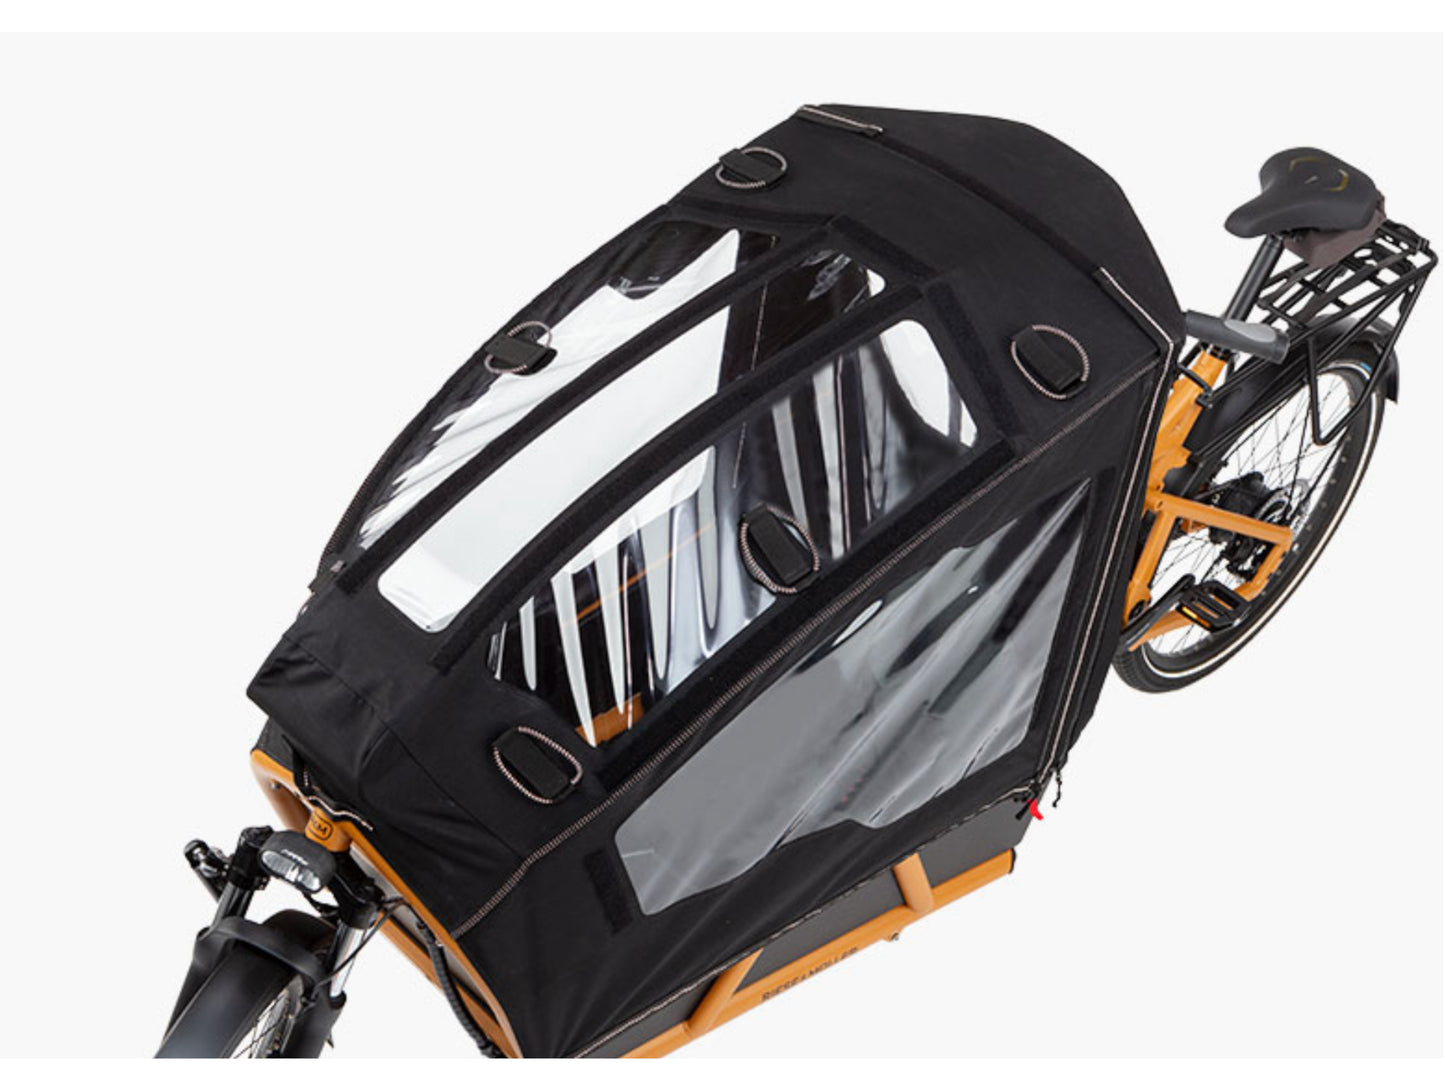 Riese & Muller Load4 75 Touring eMtb full suspension low sidewalls child cover options